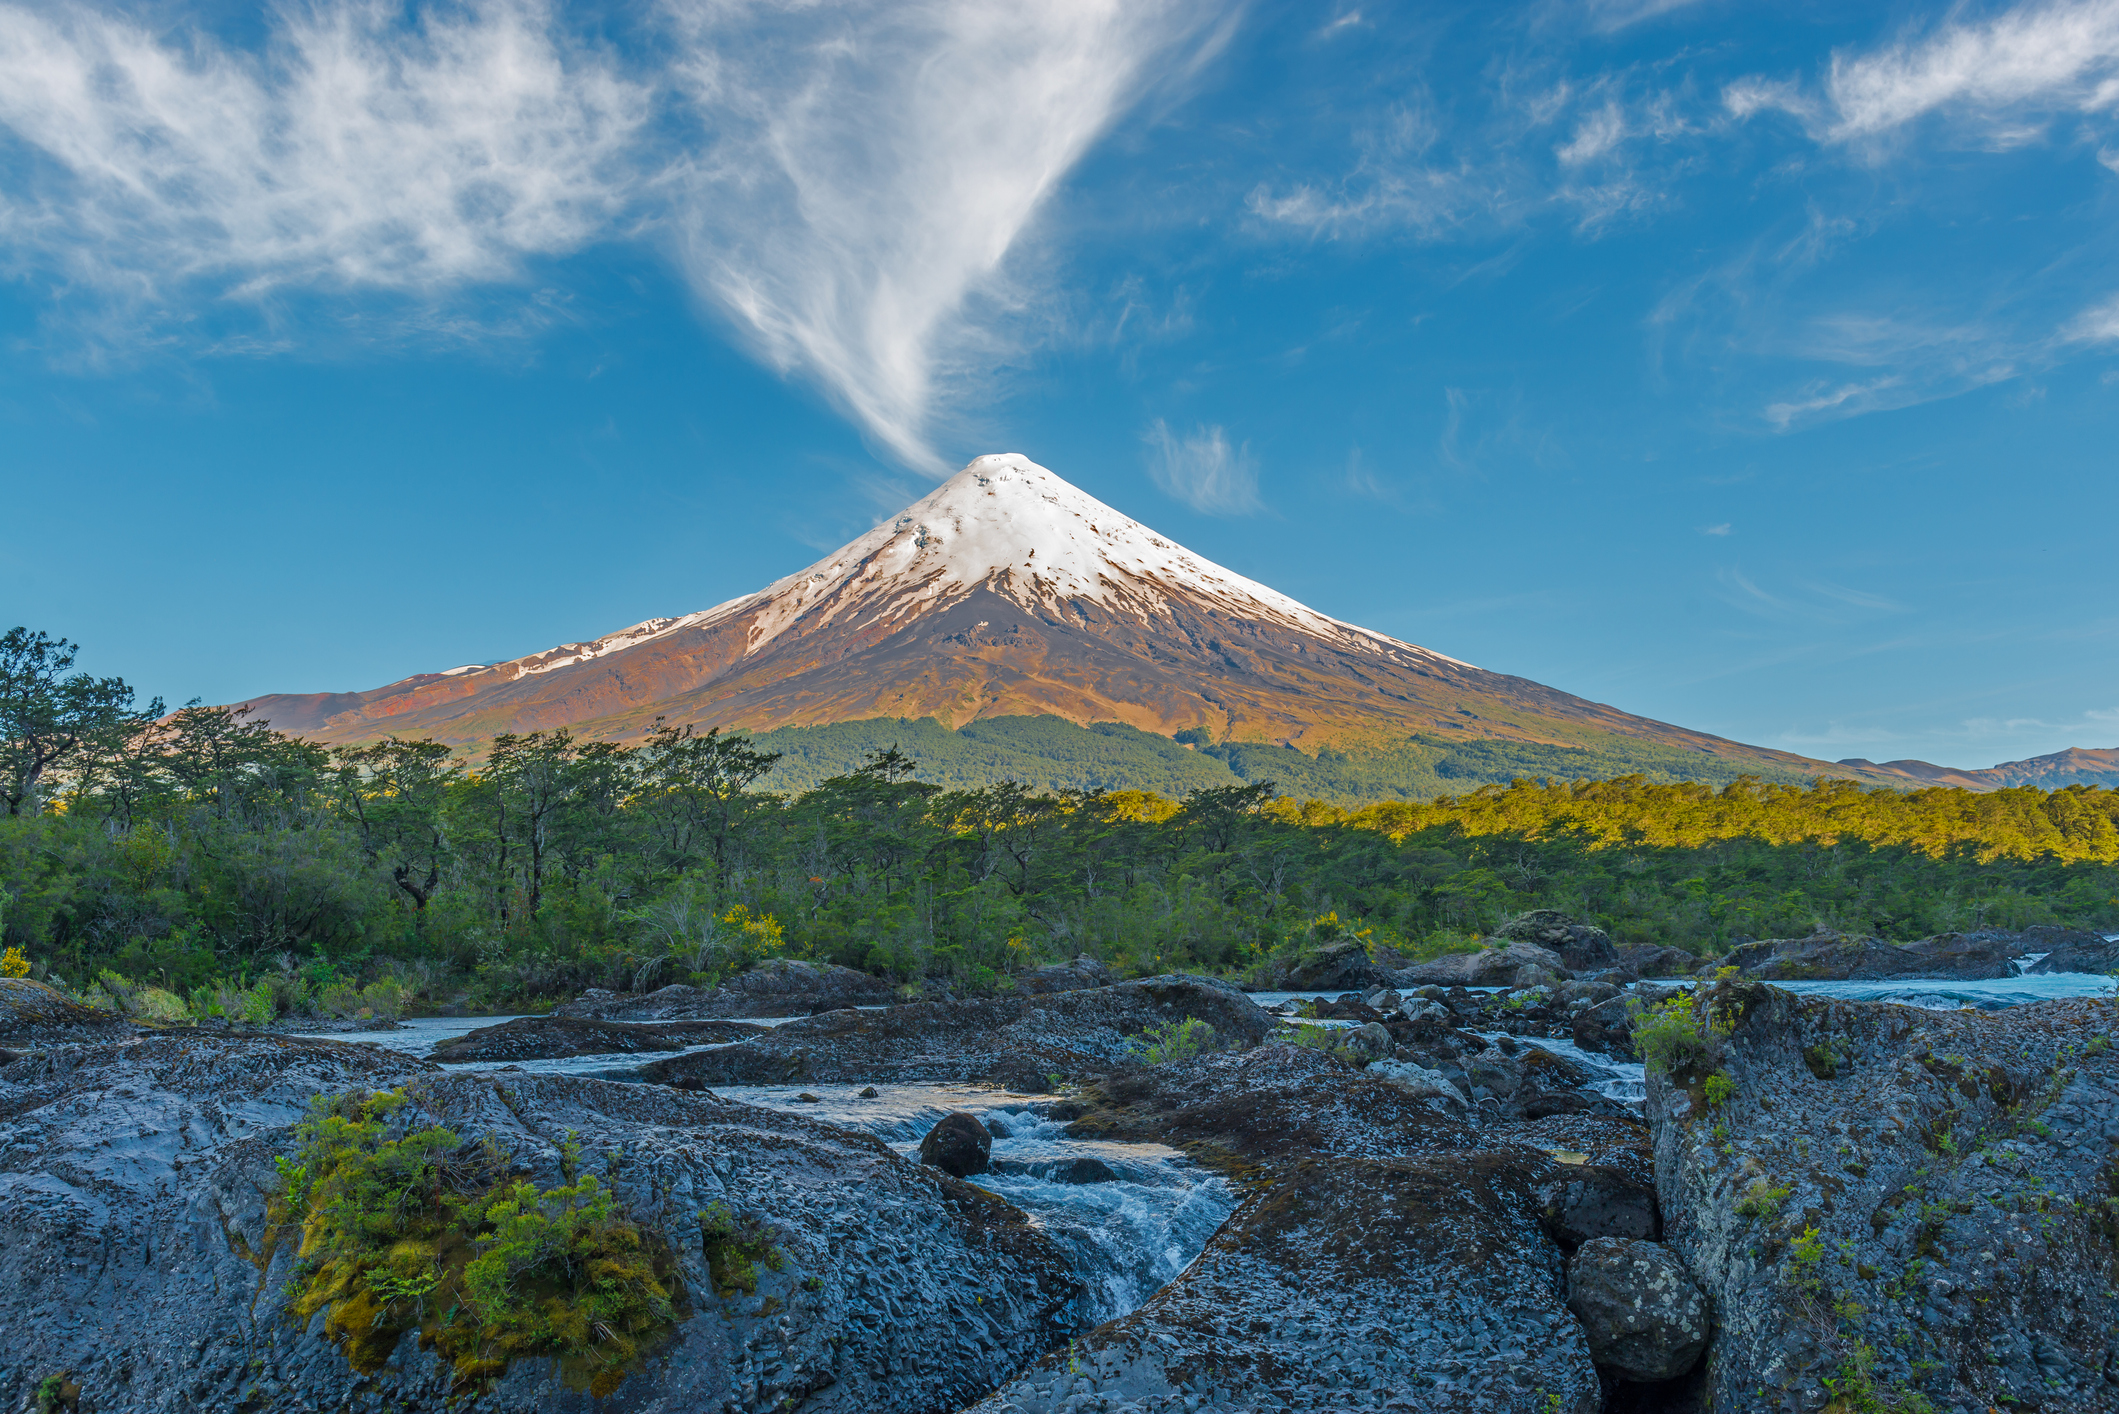 Osorno volcano with the Petrohue waterfalls and river in the foreground in the lake district near Puerto Varas and Puerto Montt, South Chile (SL_Photography—Getty Images/iStockphoto.)